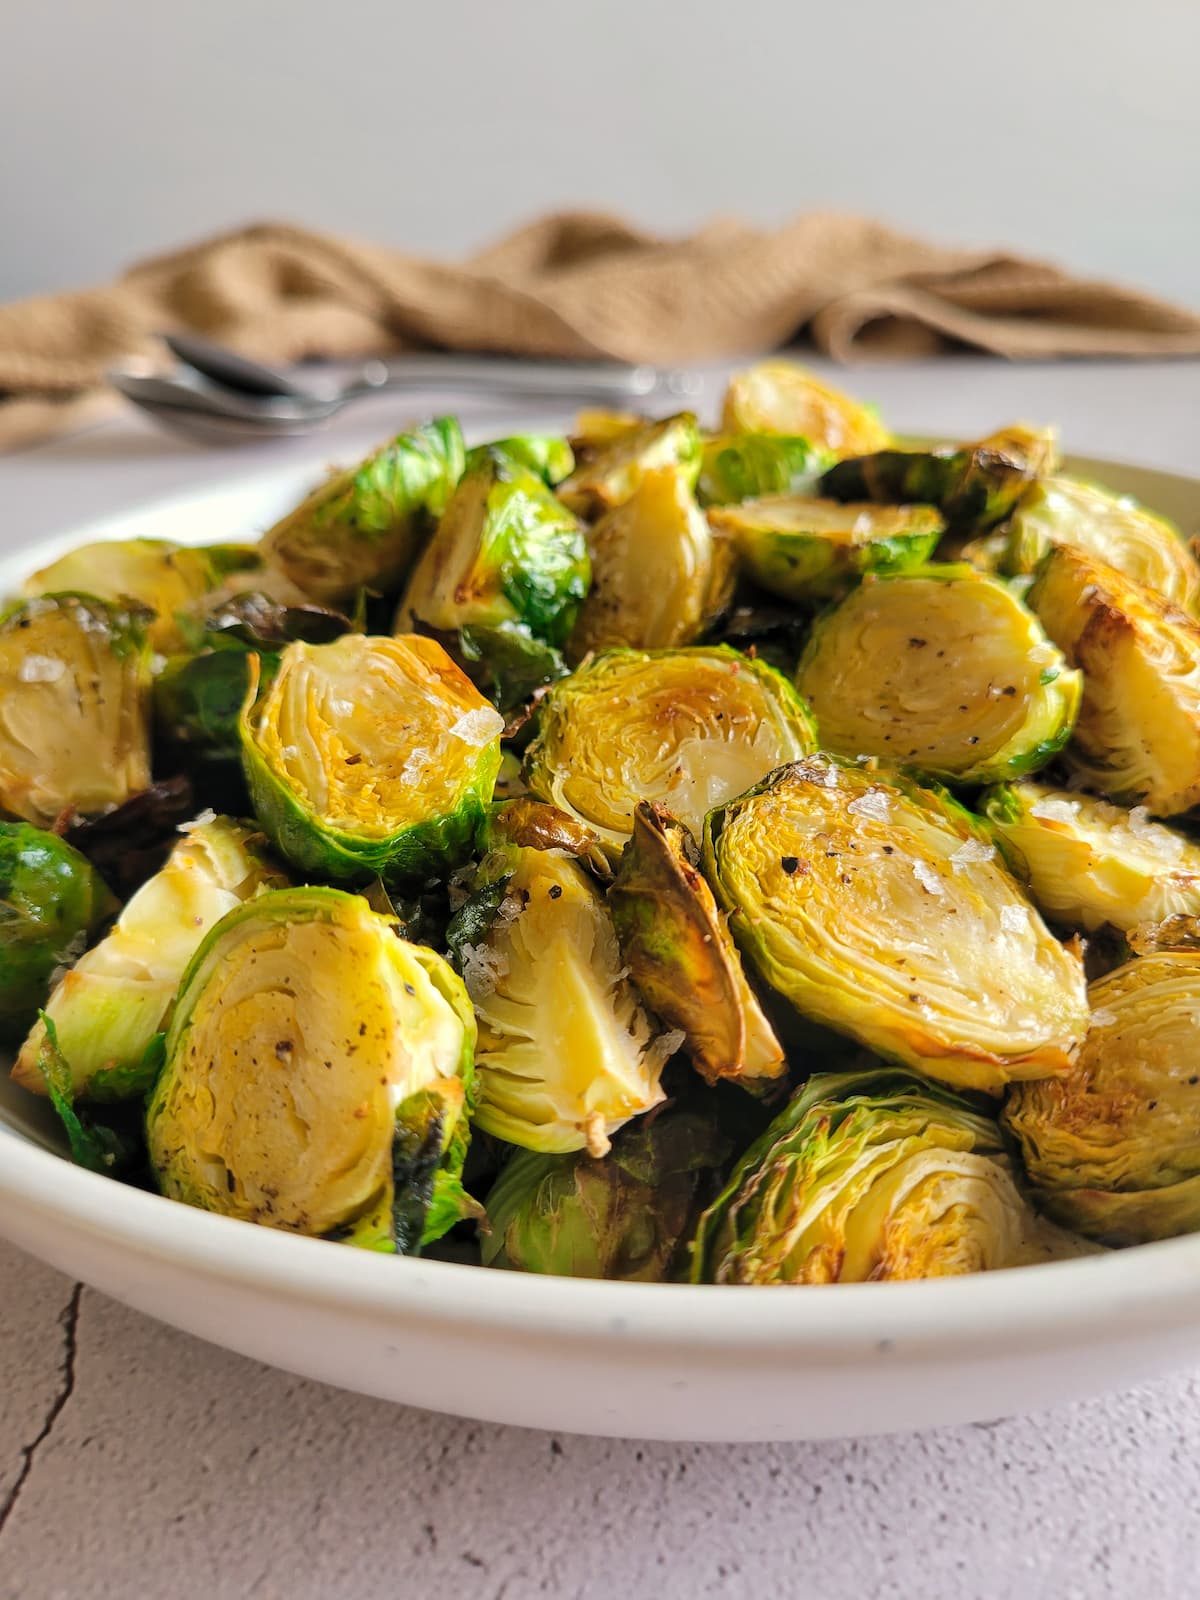 air fried brussels sprouts piled into a bowl garnished with maldon flakey sea salt